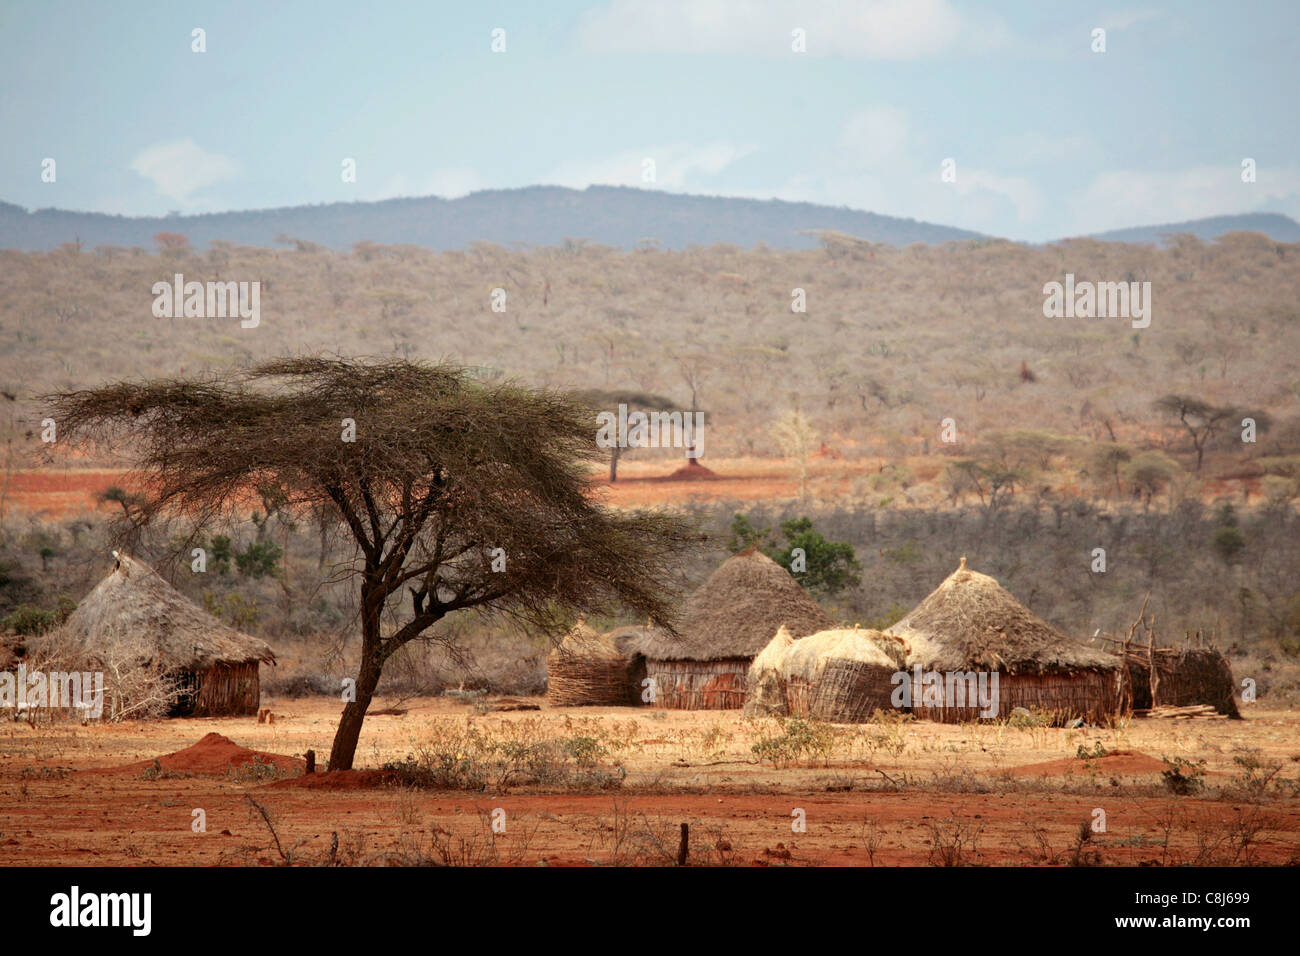 Adobe huts on the red-earth plains of Northern Kenya Stock Photo